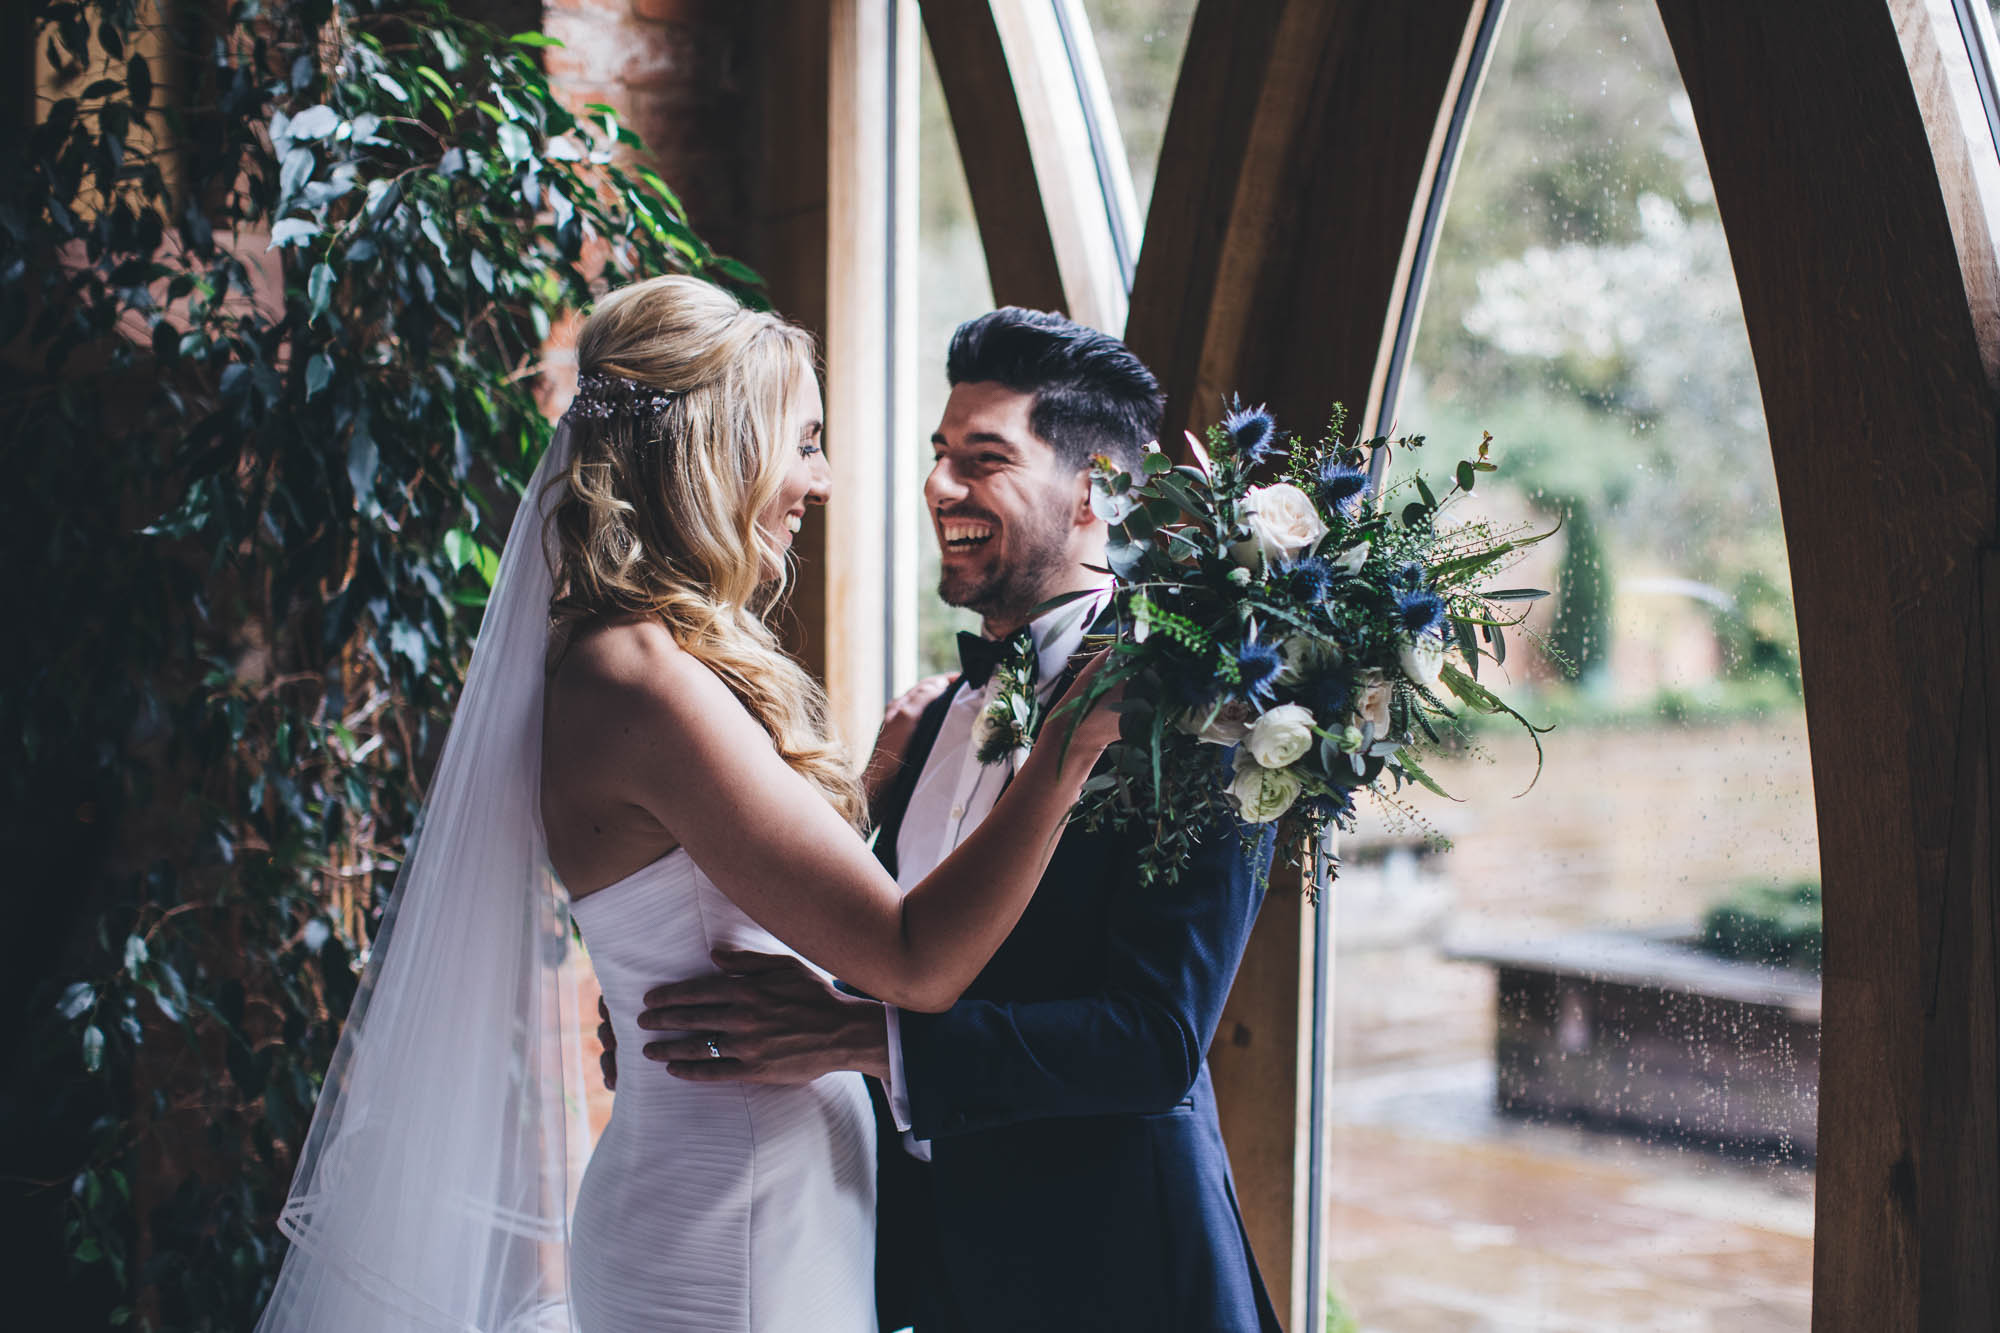 Newlyweds hold each over lovingly infront of elaborate large framed windows